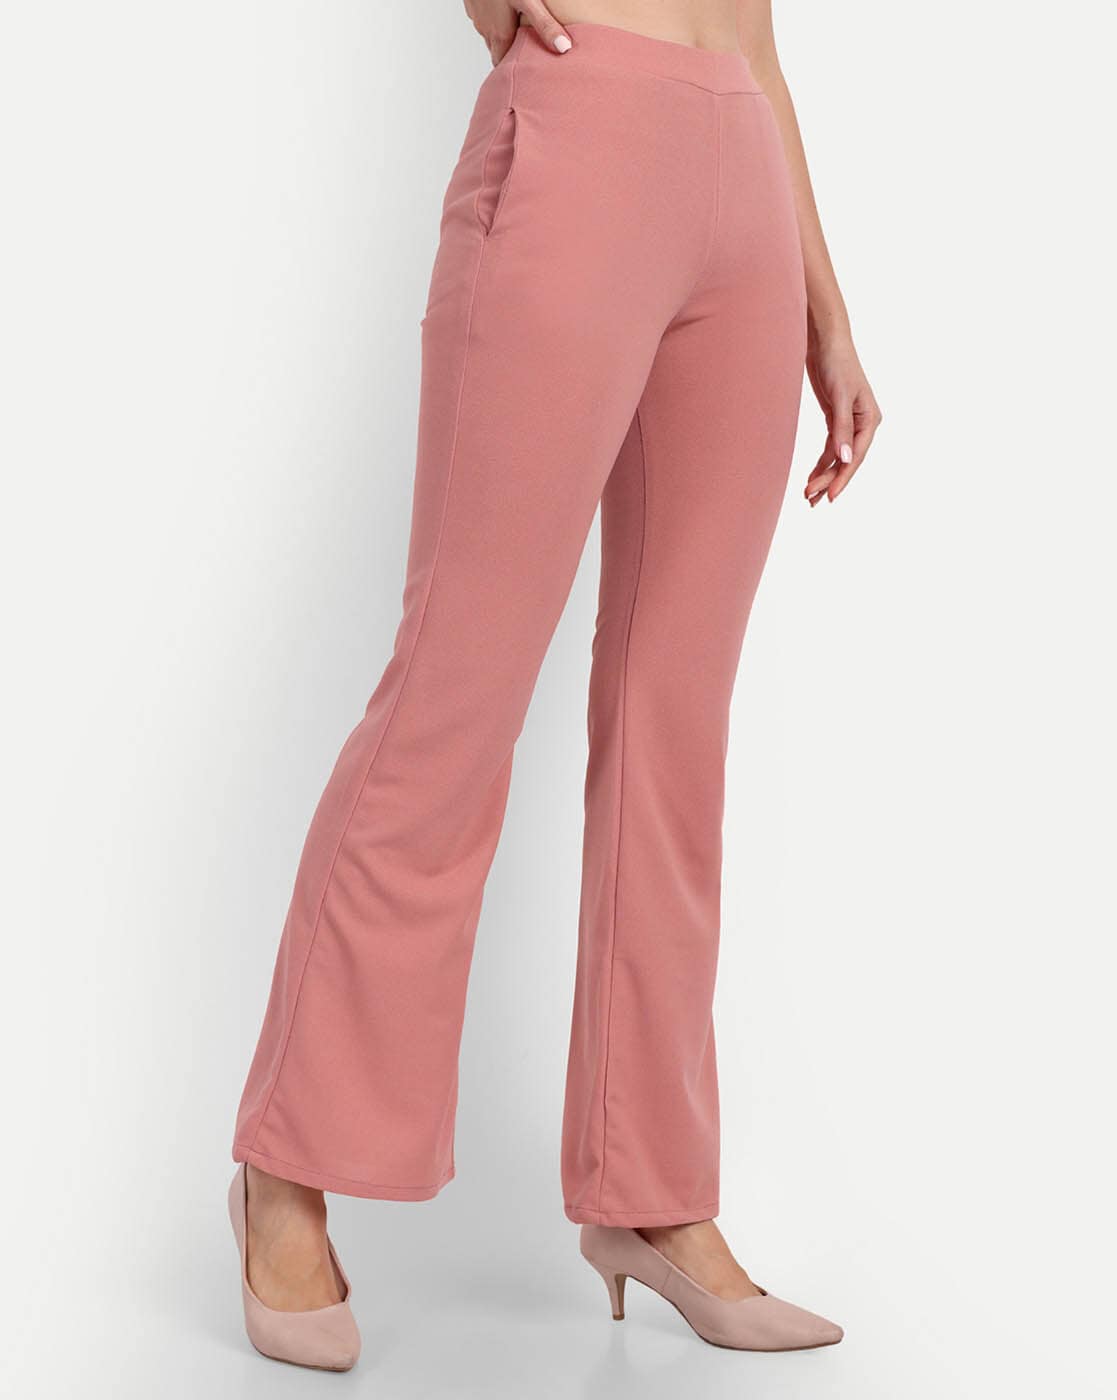 Flamingo Flare Jeans - Pink | Flare jeans, Flare jeans style, Christmas  party outfit